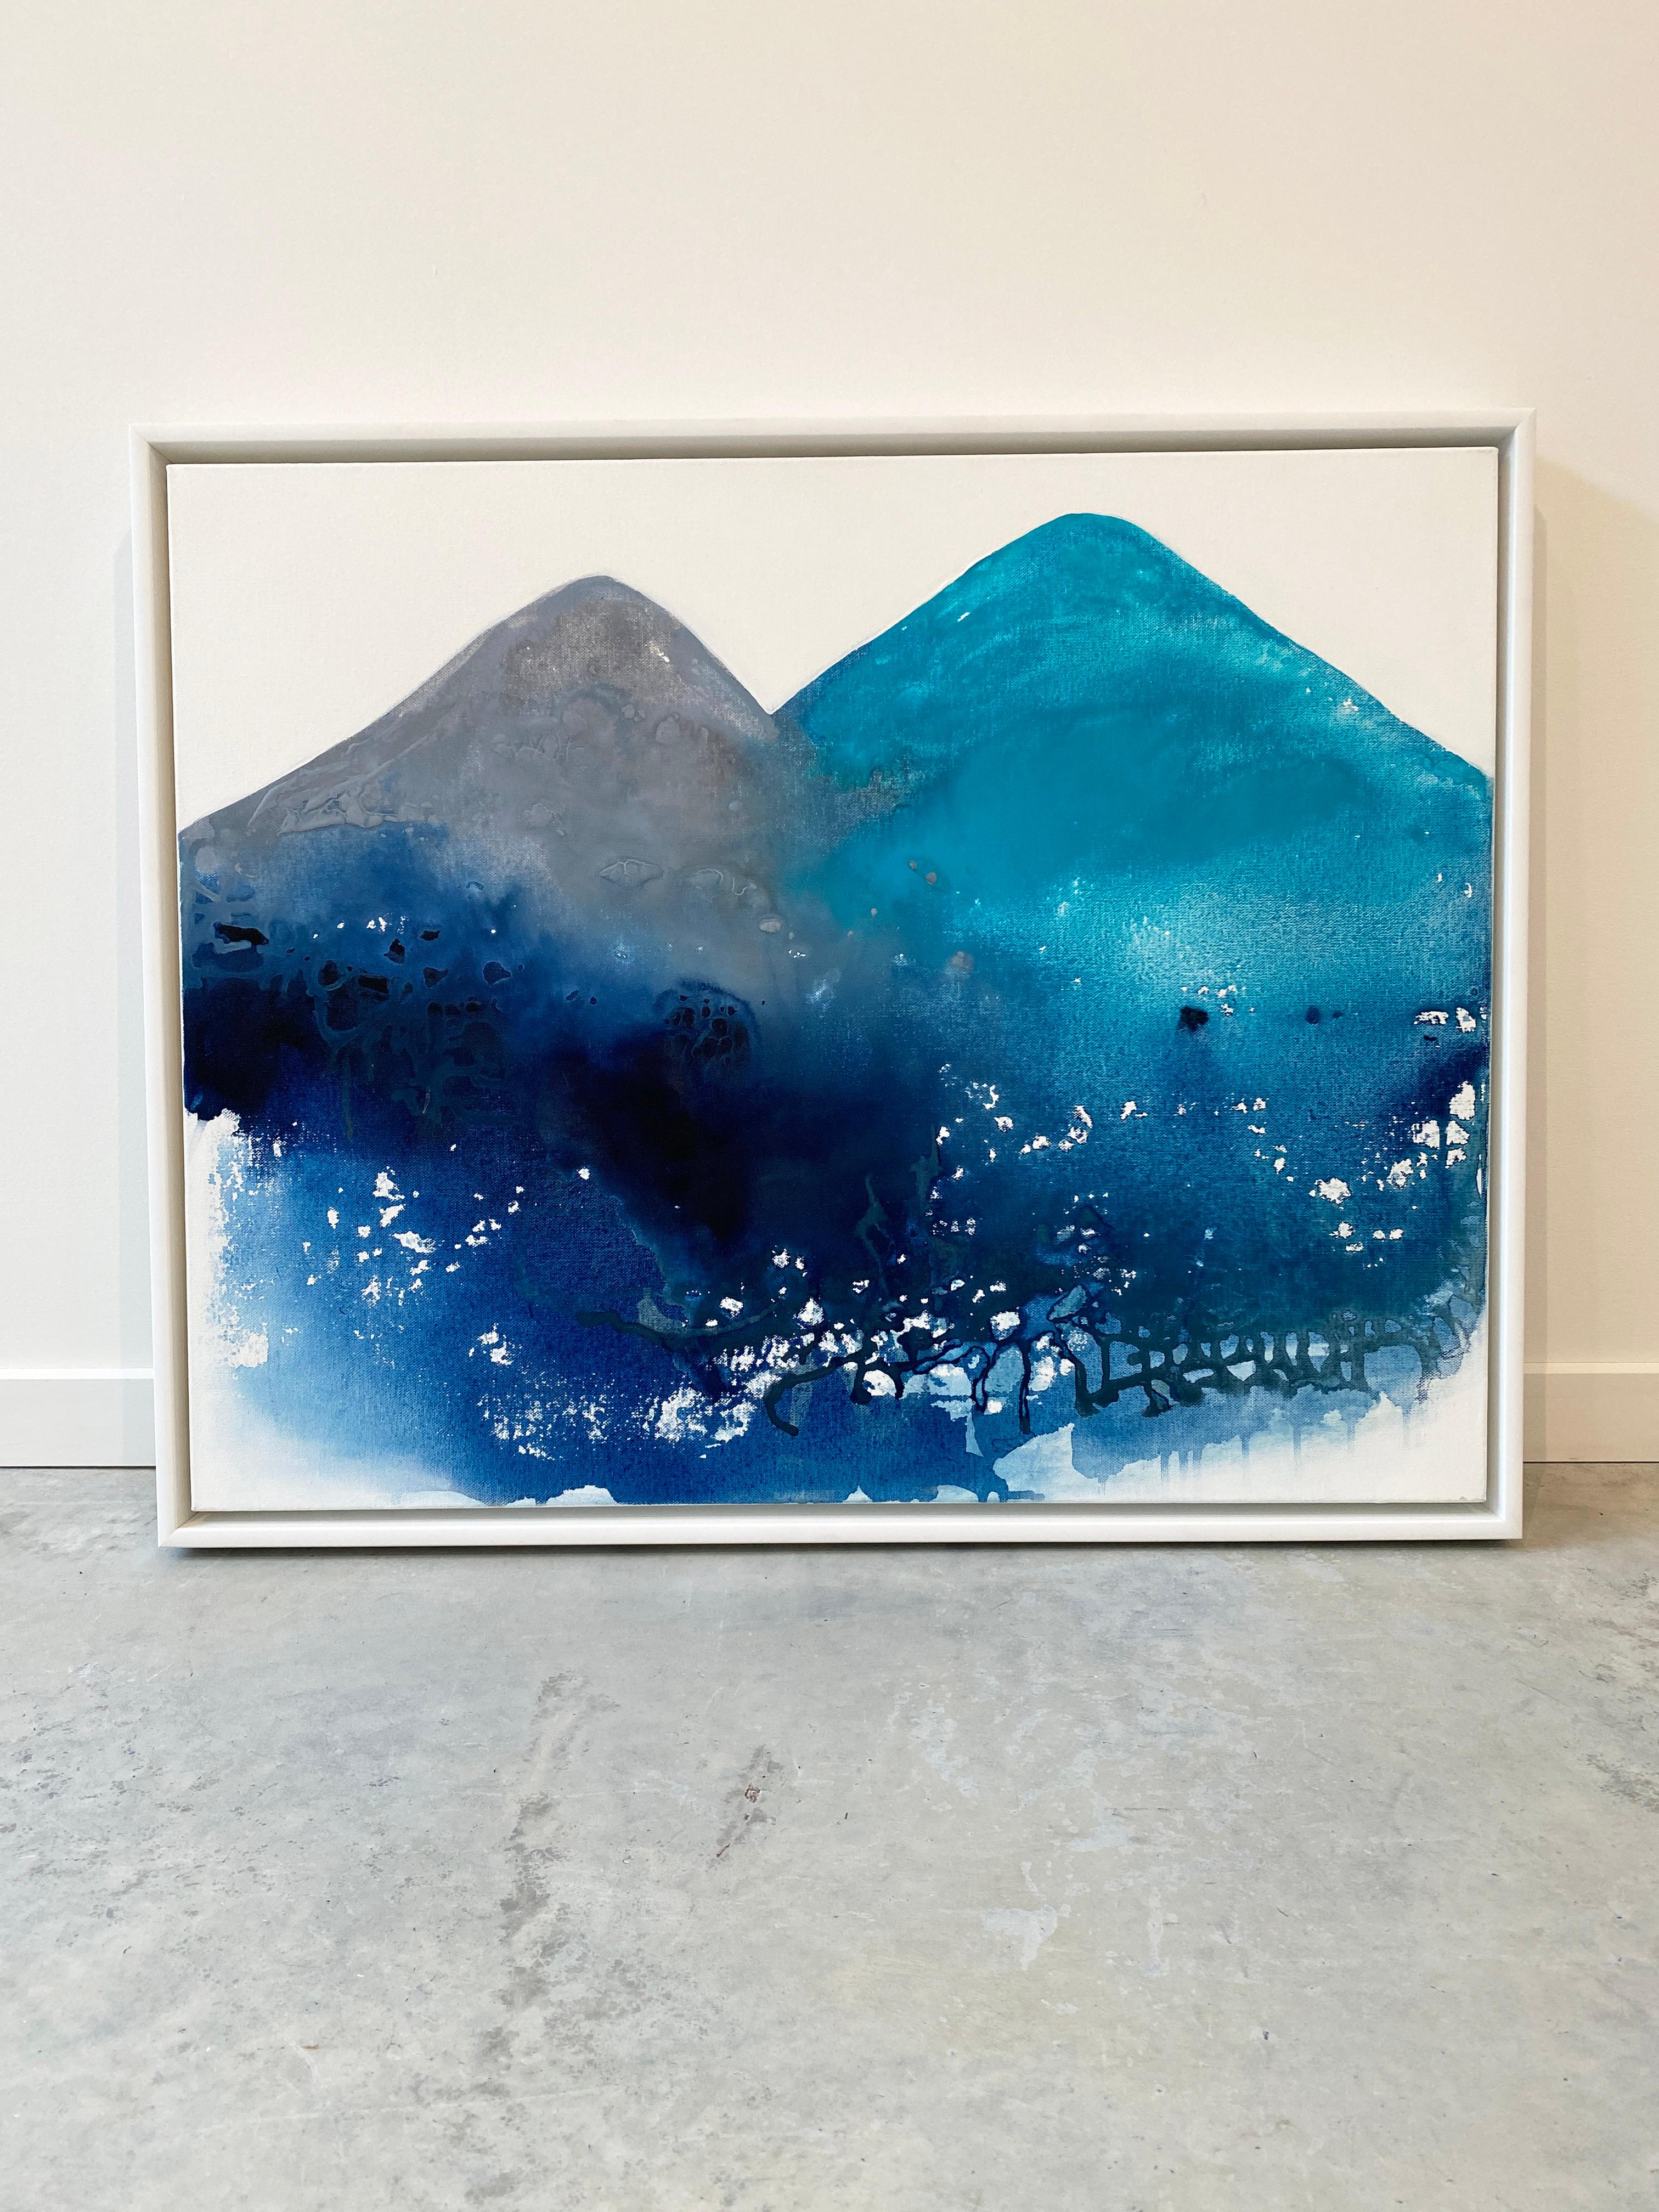 Aqua grey Hills Mountain minimalist  landscape blue water lake framed white - Abstract Expressionist Painting by Kathleen Rhee